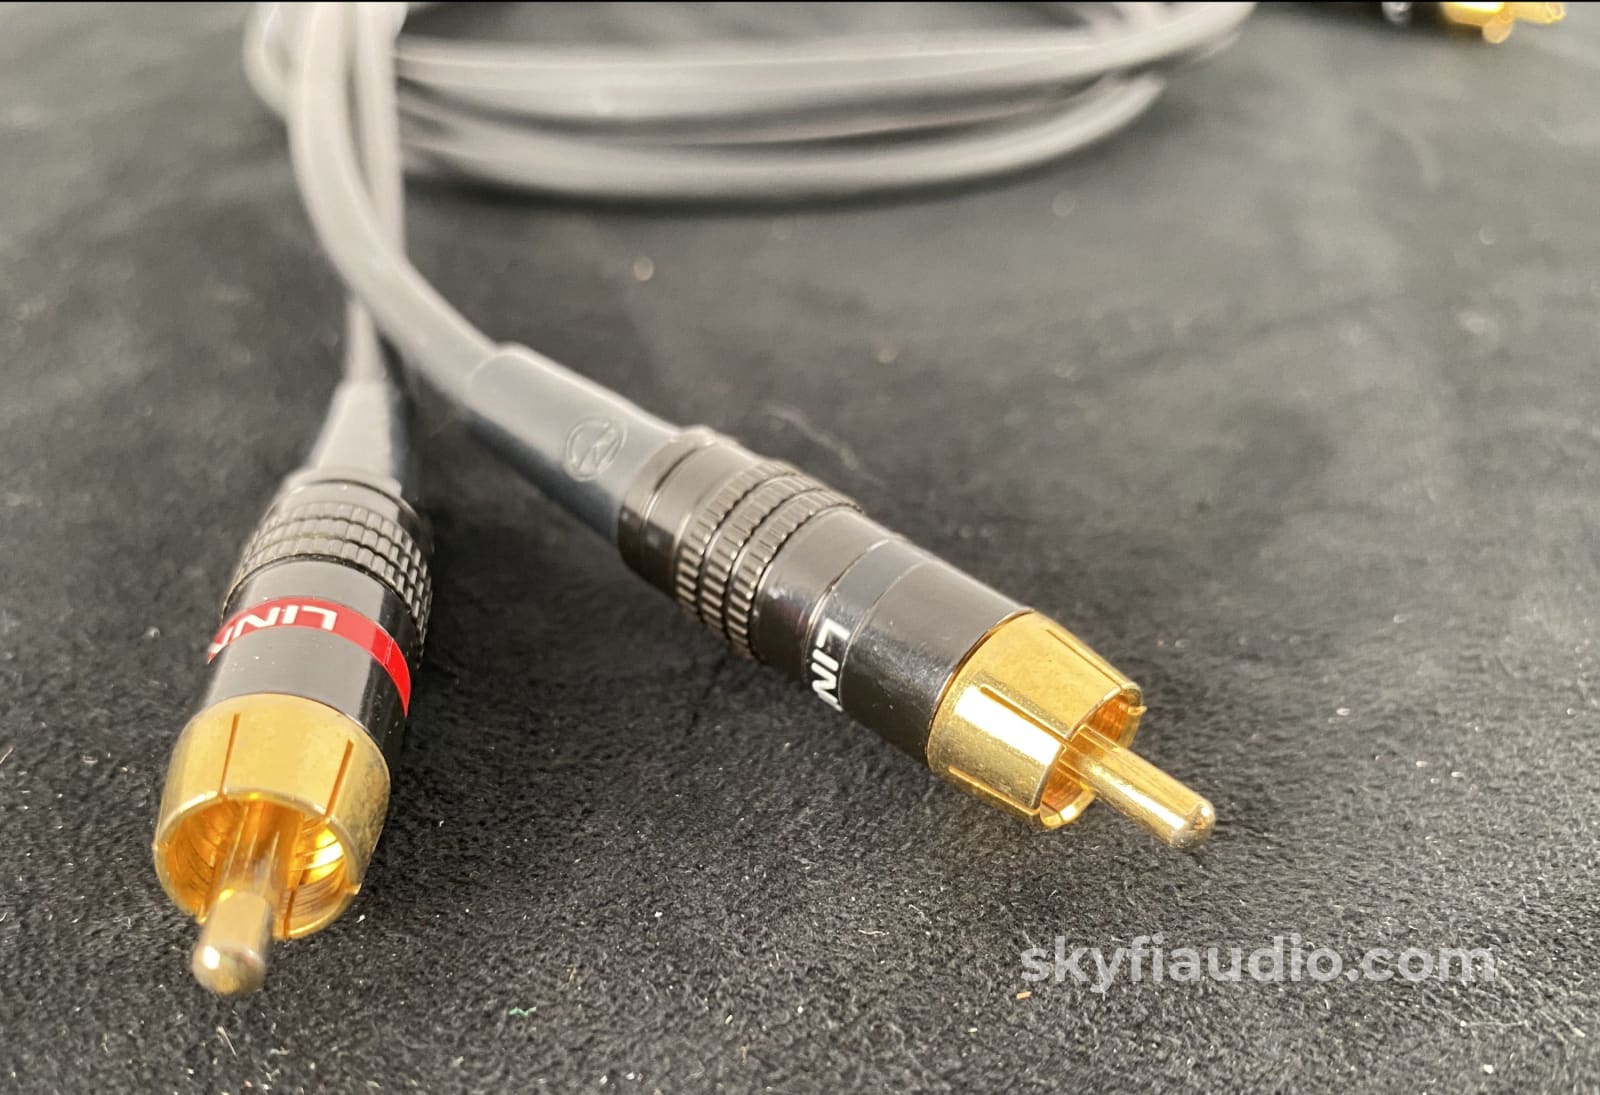 Linn Analog Audio Interconnect - Rca 4 Cables